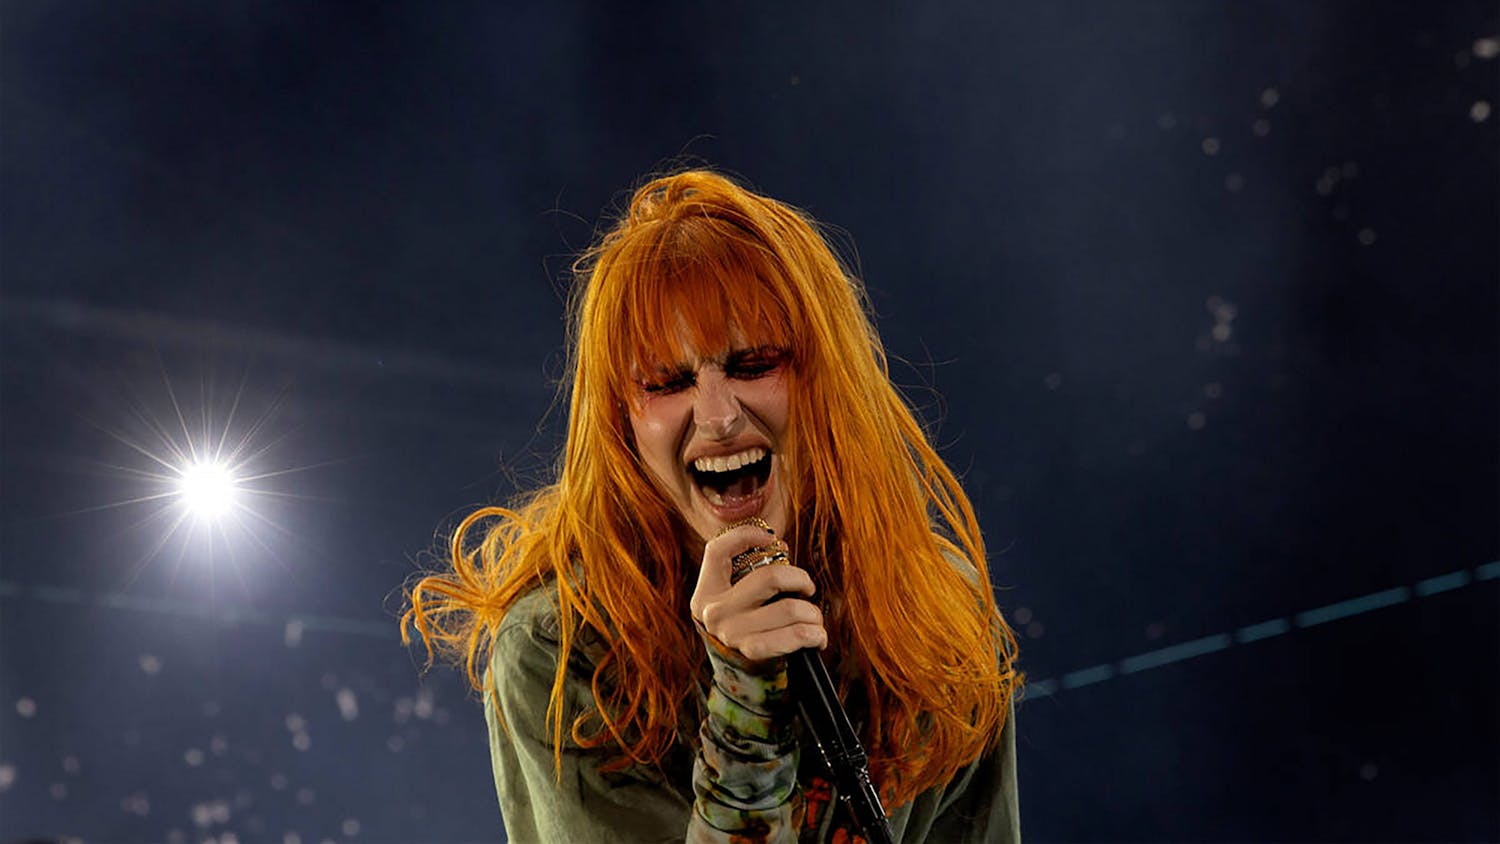 Paramore's lead singer, Hayley Williams, performs at the When We Were Young music festival at the Las Vegas Festival Grounds on Oct. 23, 2022. The October performance generated excitement in fans at the idea of new music coming from the group in the future.